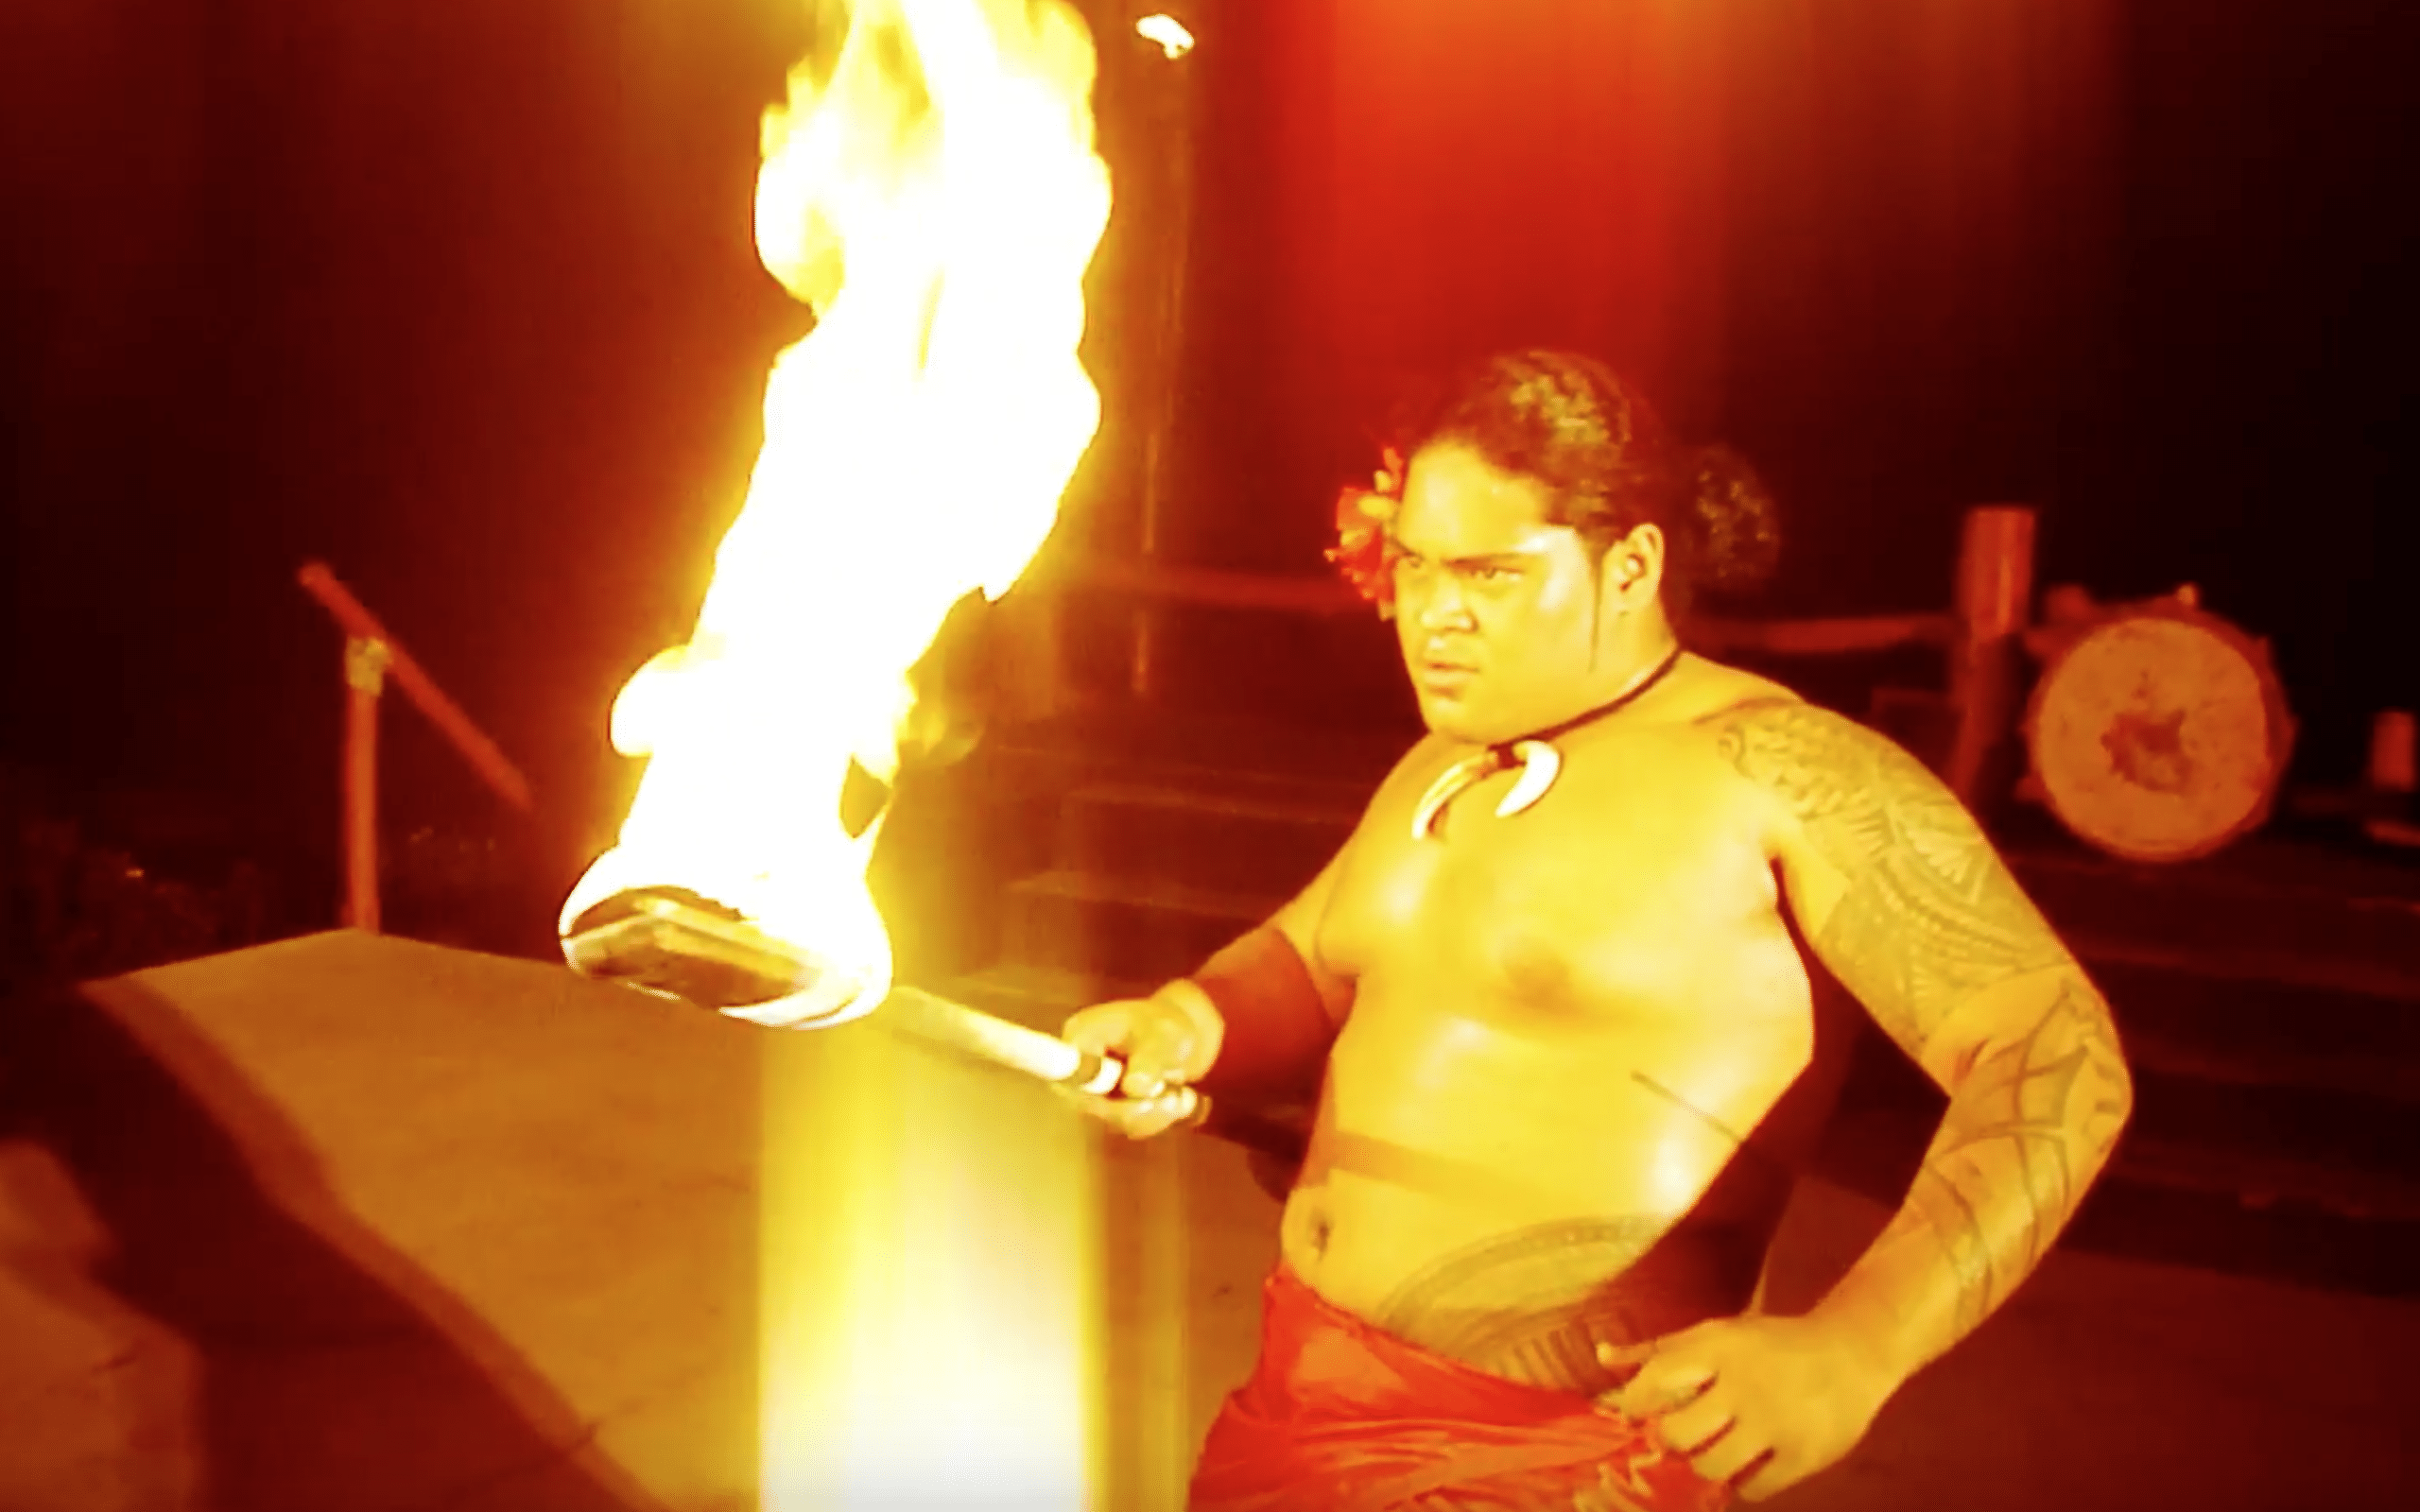 Hawaiian man with tattoos and traditional Hawaiian lava-lava attire, preforming the ceremonial fire knife dance at the Bobrick Fire & Knife Convention (video production by Merging Media).